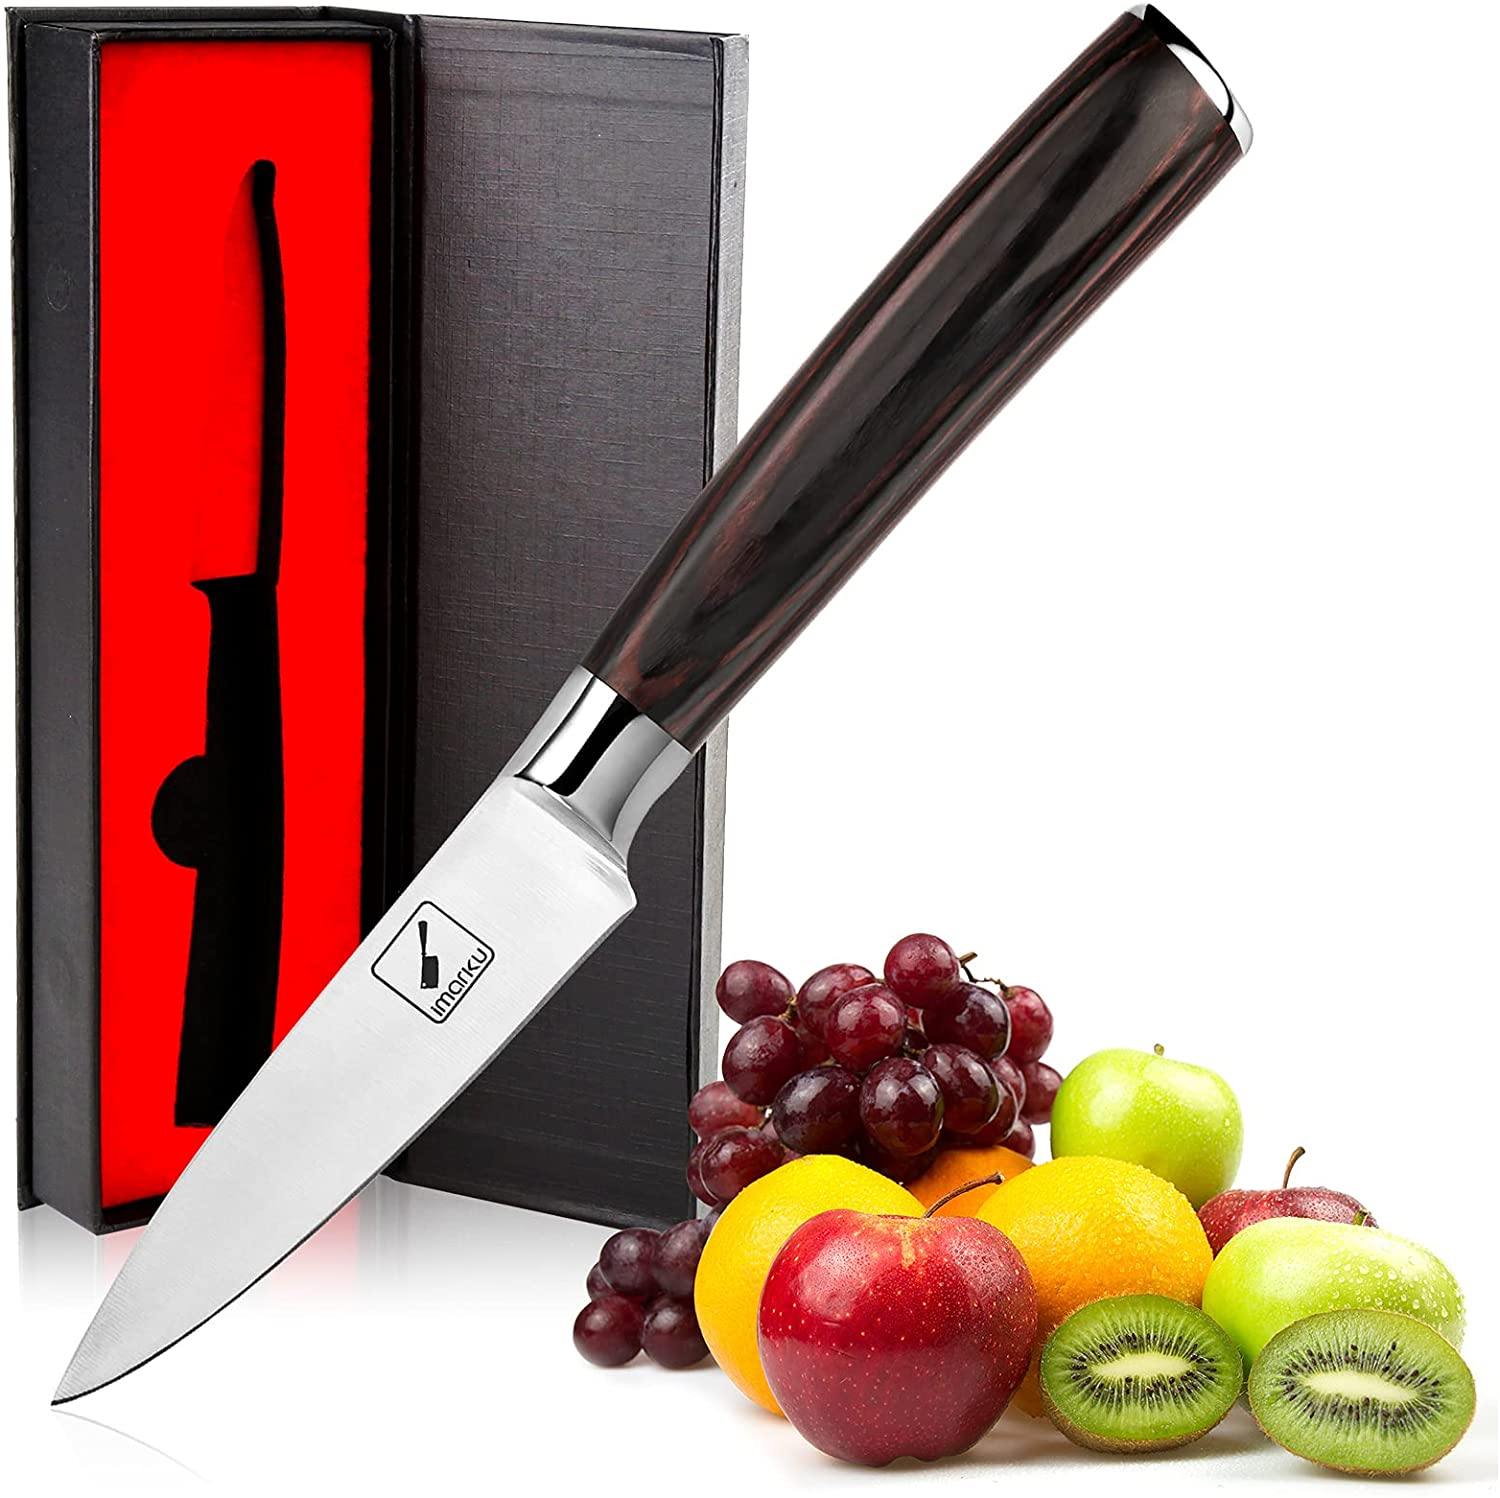  imarku Chef Knife 8 inch, High-Carbon Stainless Steel